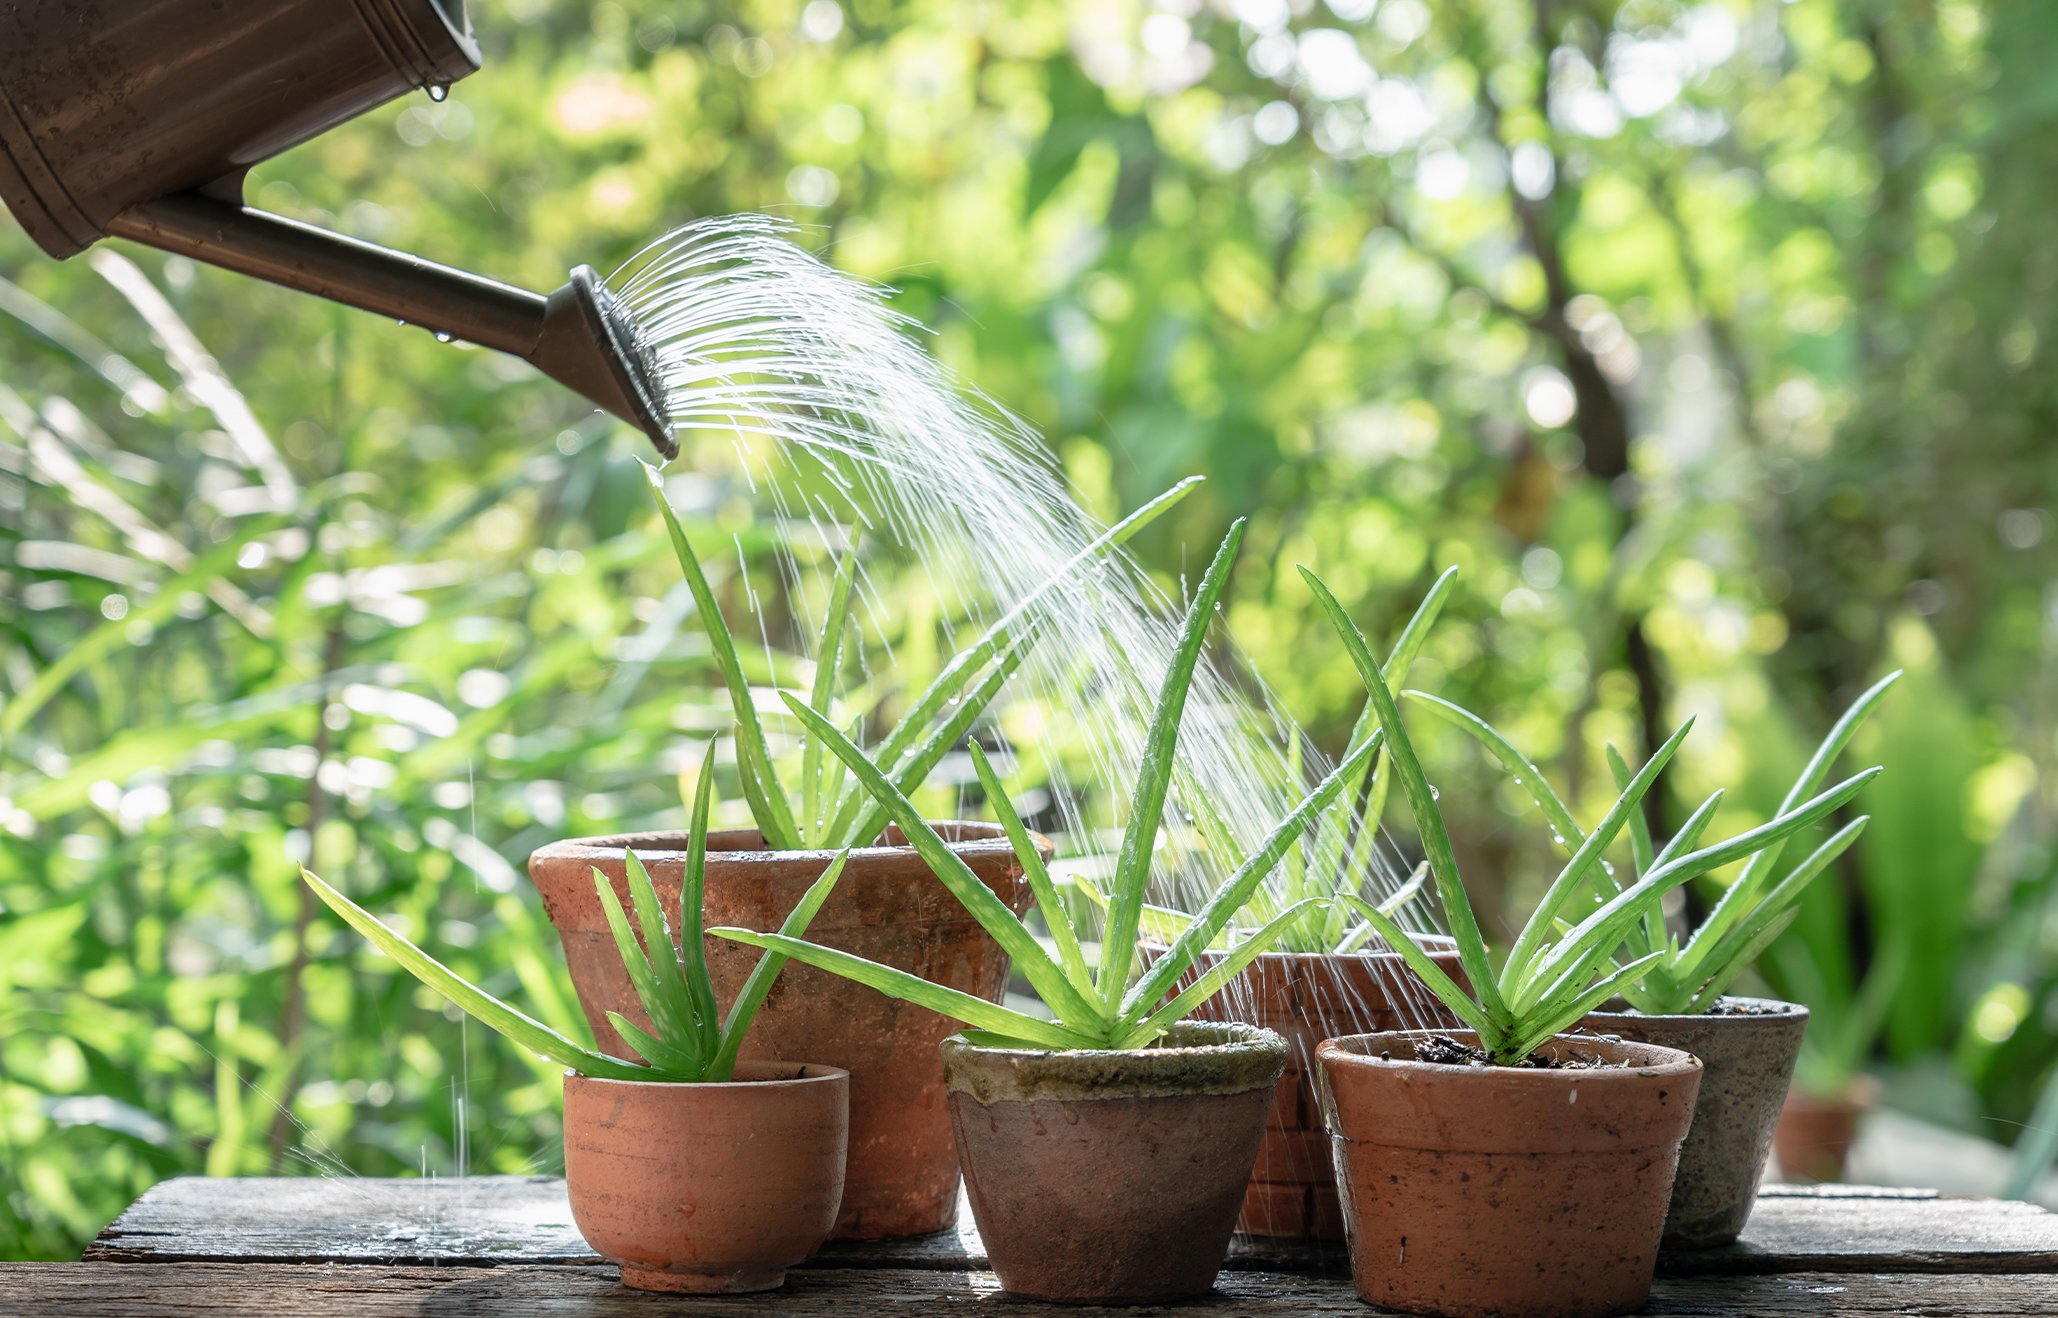 ASK THE EXPERTS: HOW TO LOOK AFTER MY HOUSEPLANT